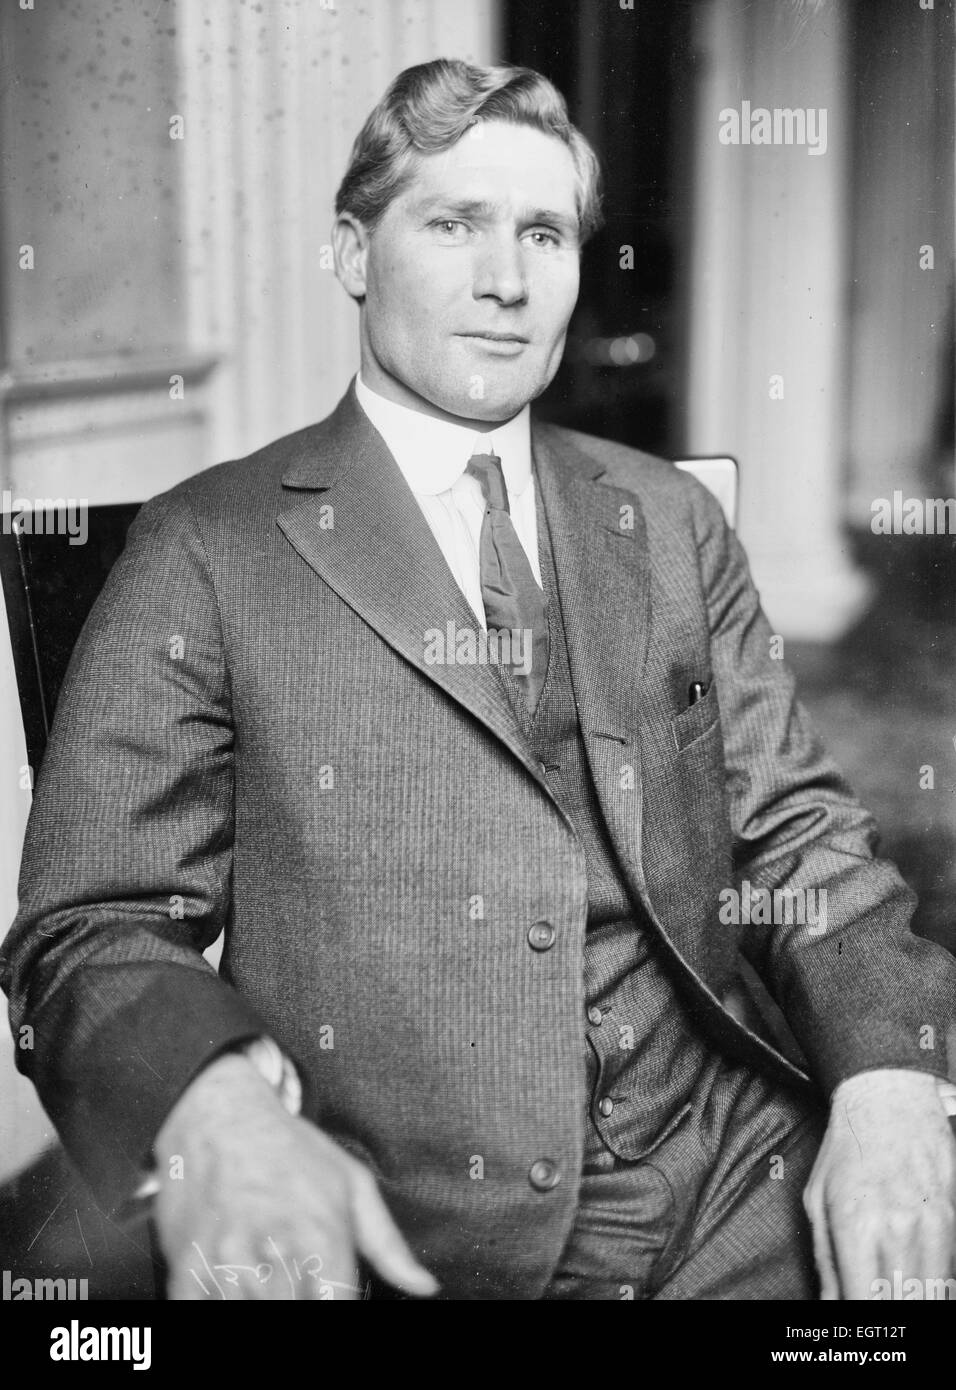 John R Lawson - miner and labor leader John R. Lawson who was a witness before the federal Commission on Industrial Relations hearings in 1915 at the New York City Hall, New York City. Stock Photo